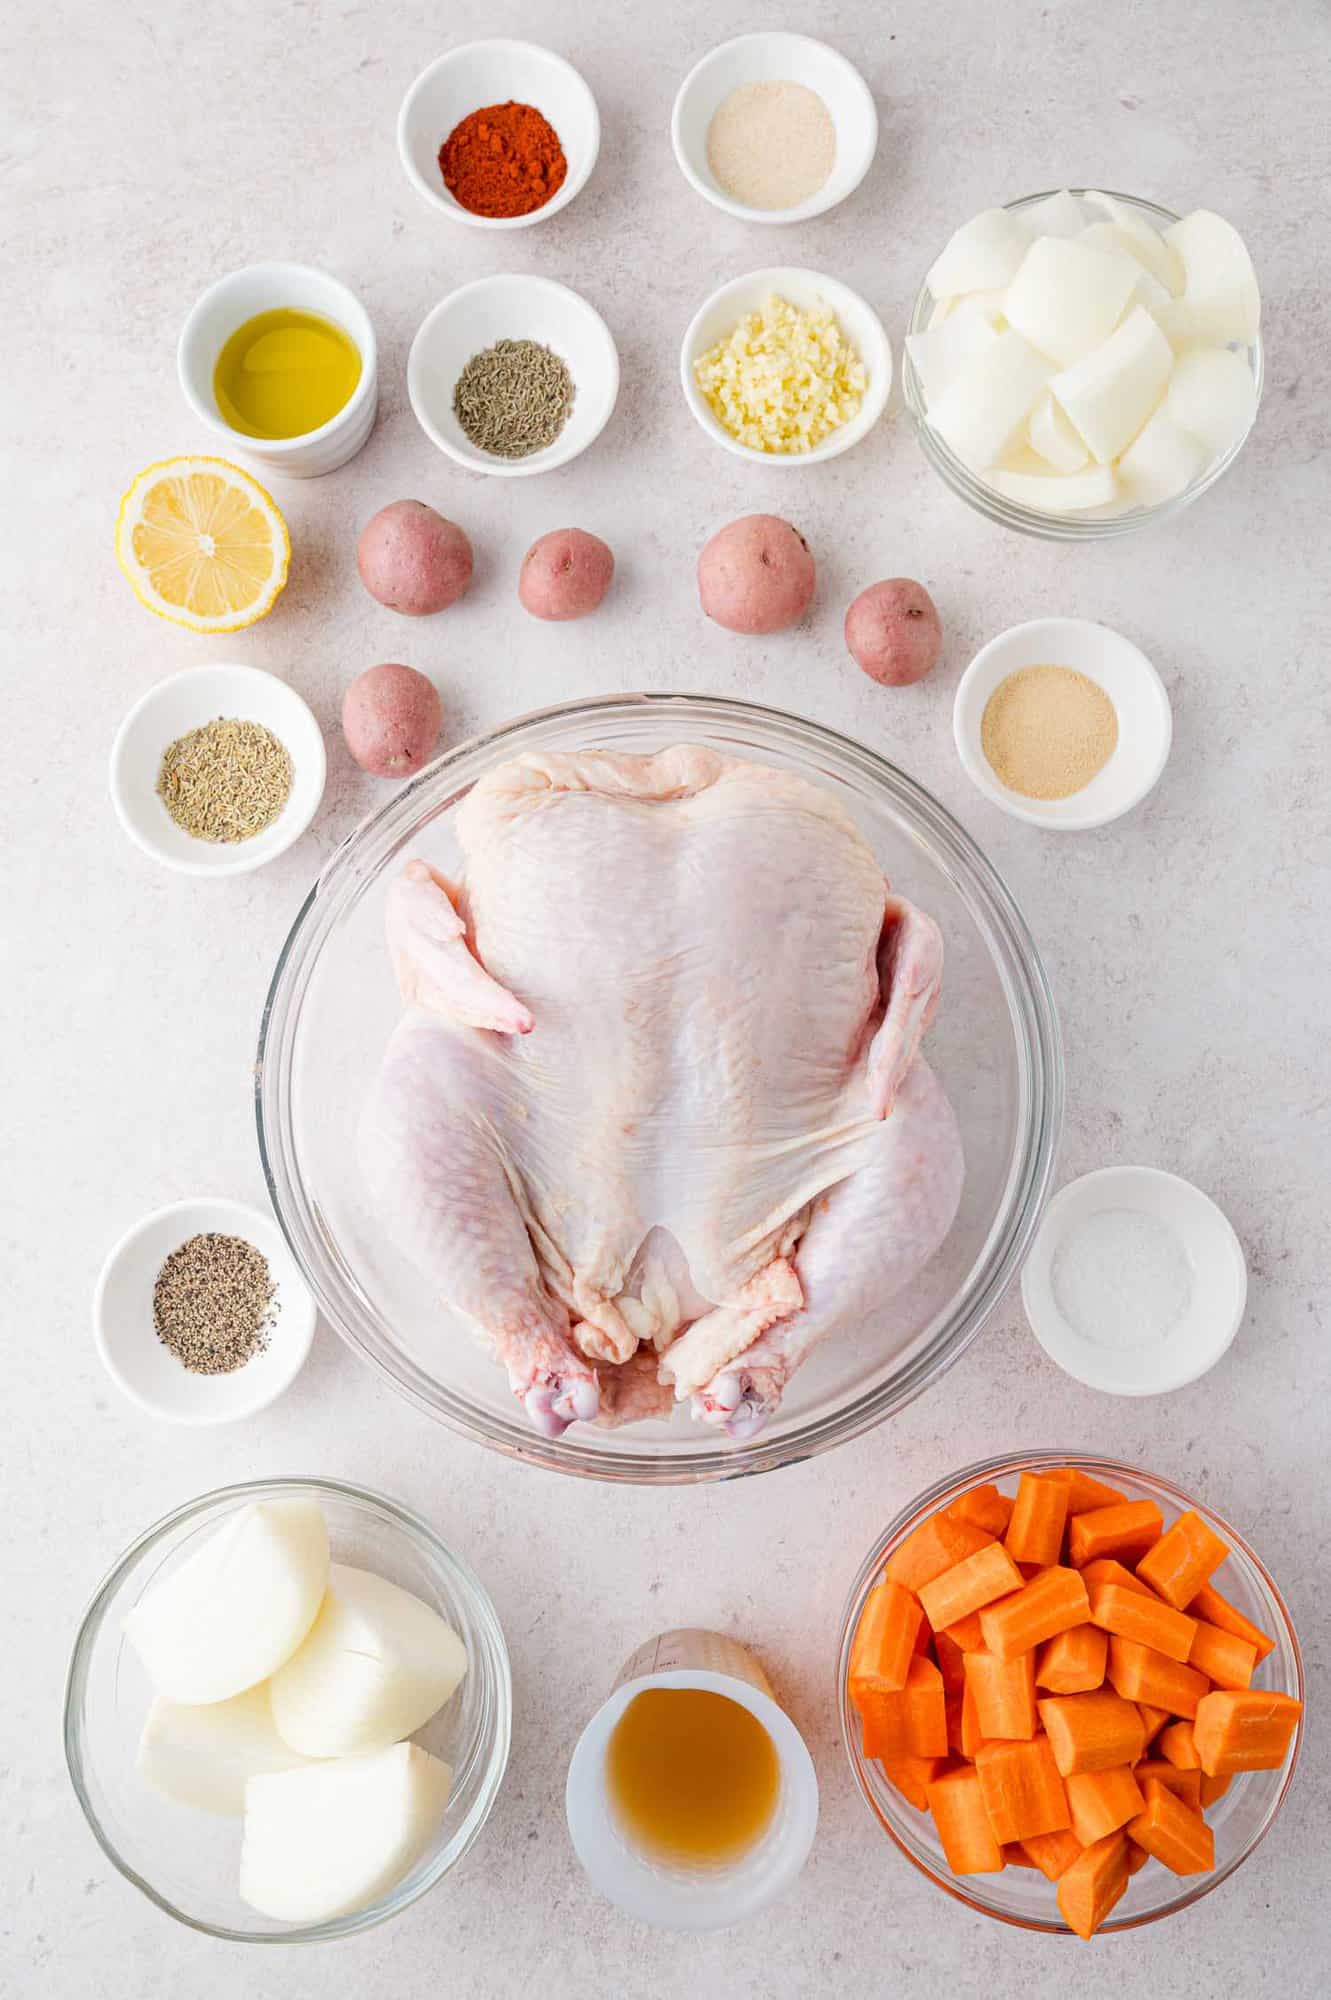 Ingredients needed for recipe, including a whole chicken.